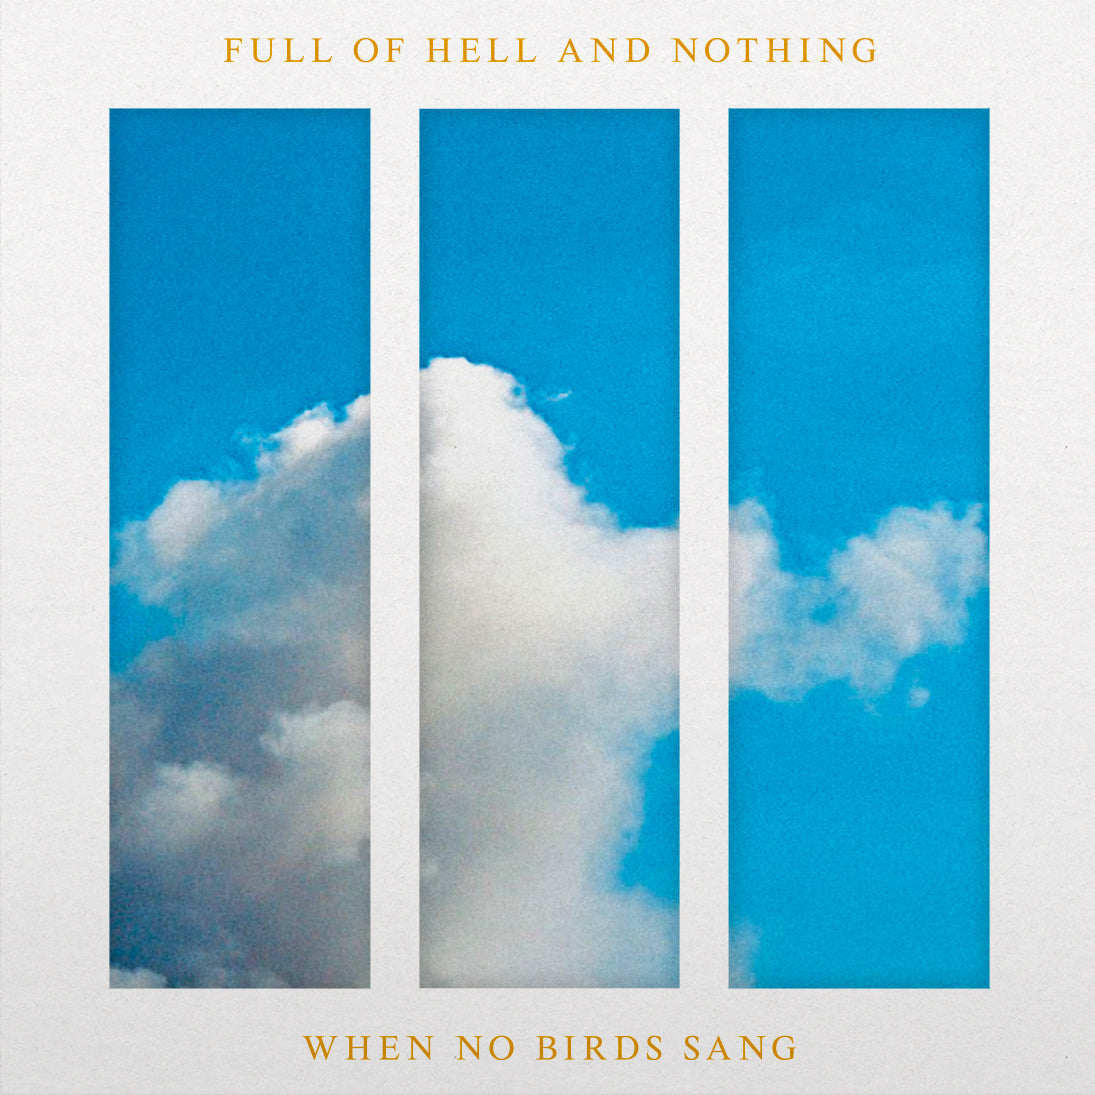 FULL OF HELL & NOTHING "When No Birds Sang" CD